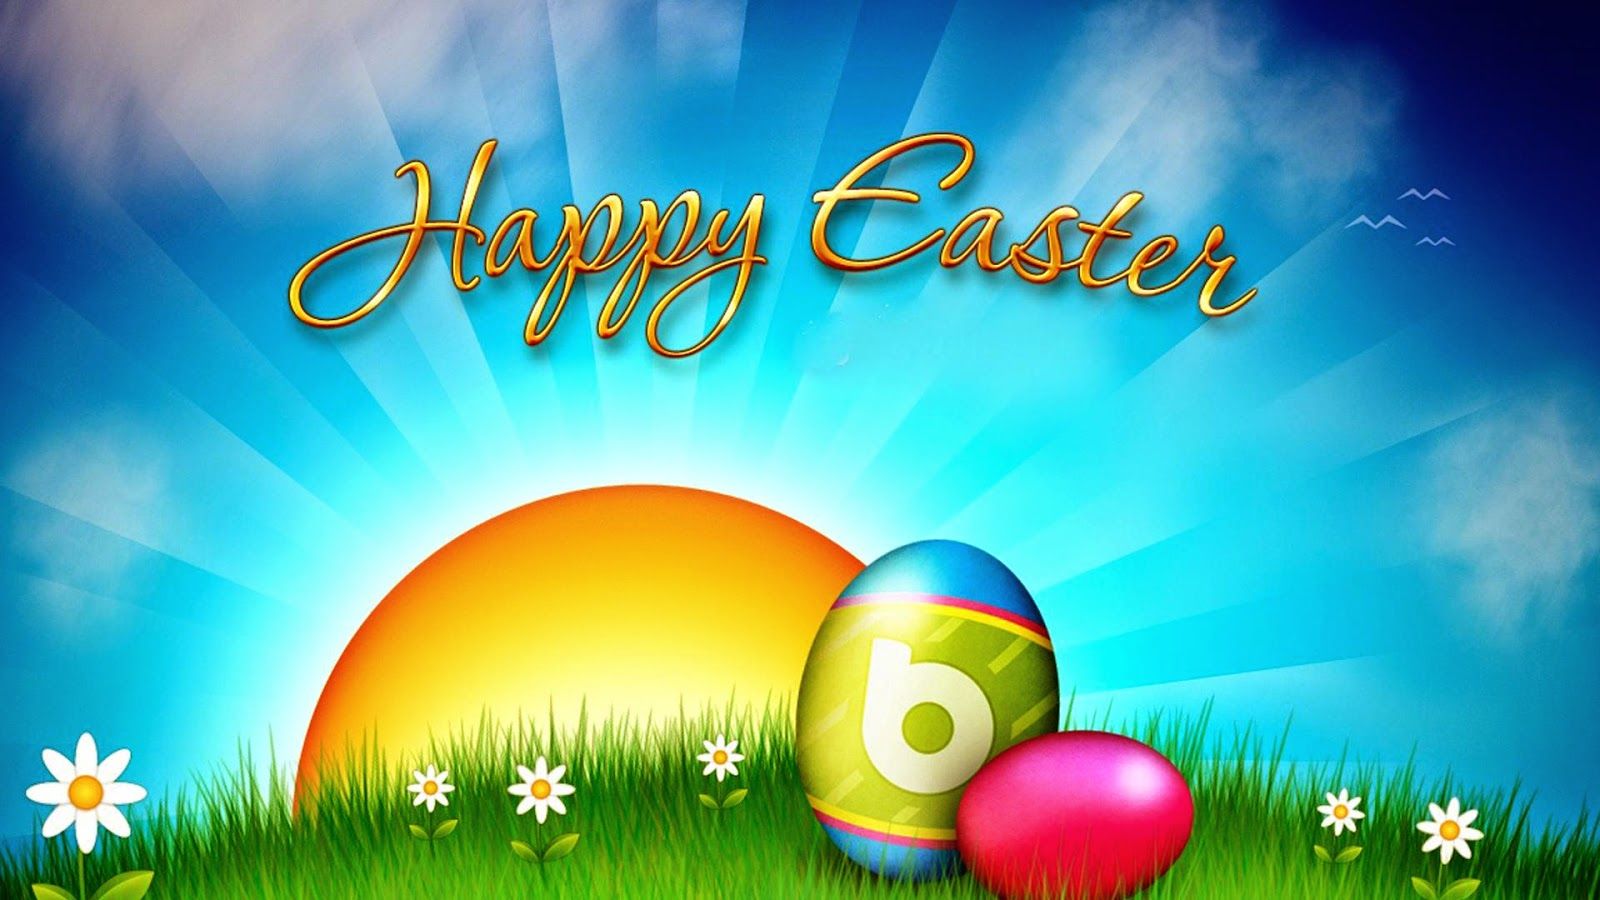 Happy easter quotes to family Quotes about easter quotesgram